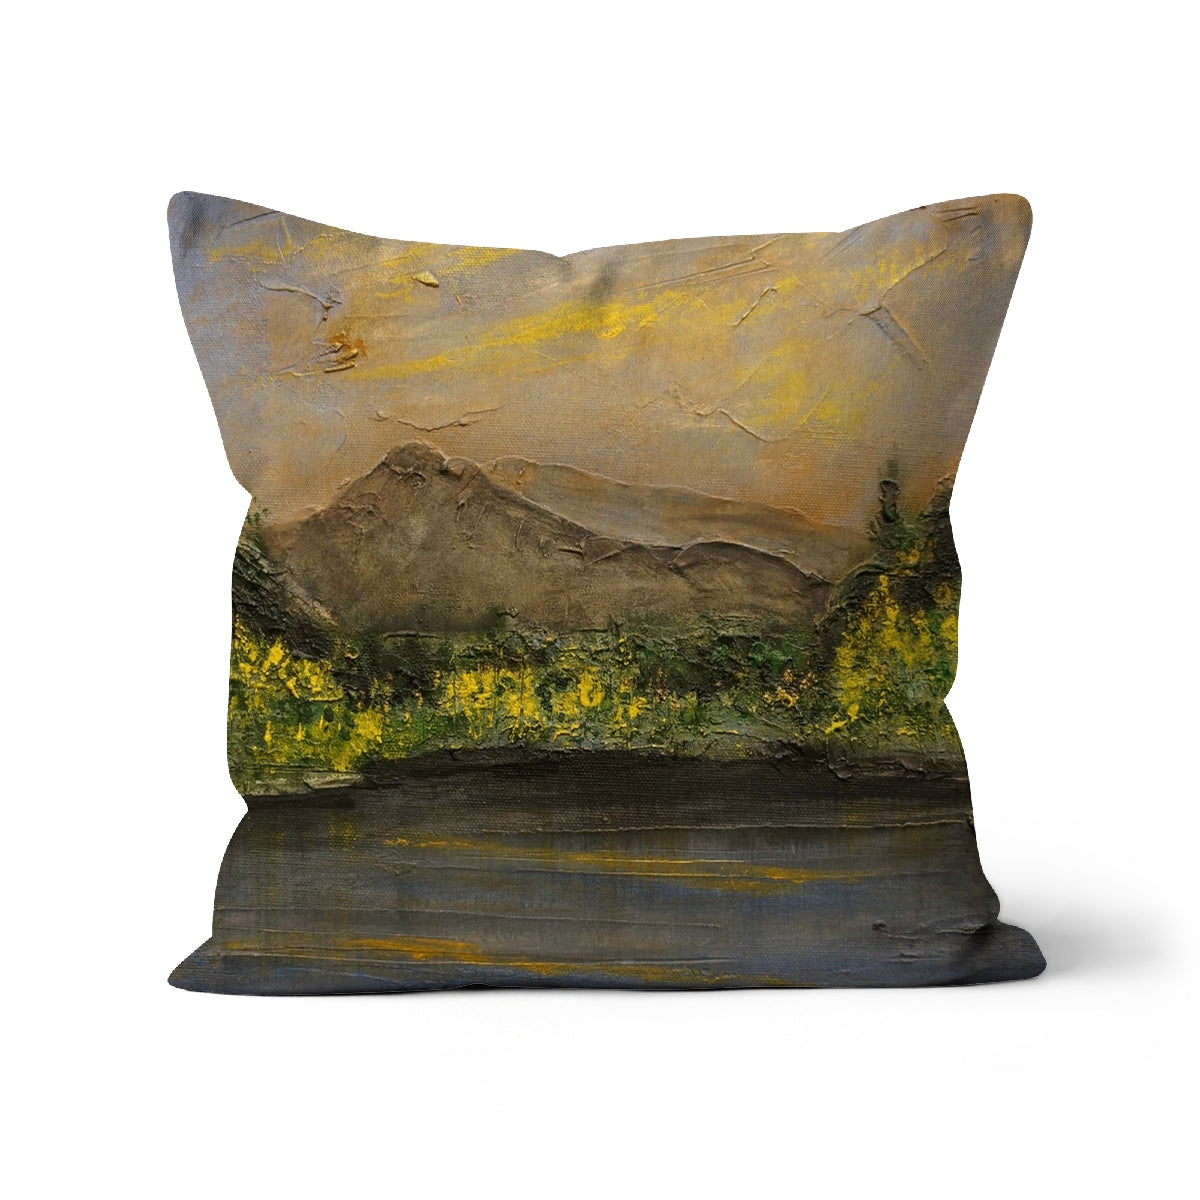 Glencoe Lochan Dusk Art Gifts Cushion-Cushions-Scottish Lochs & Mountains Art Gallery-Faux Suede-24"x24"-Paintings, Prints, Homeware, Art Gifts From Scotland By Scottish Artist Kevin Hunter